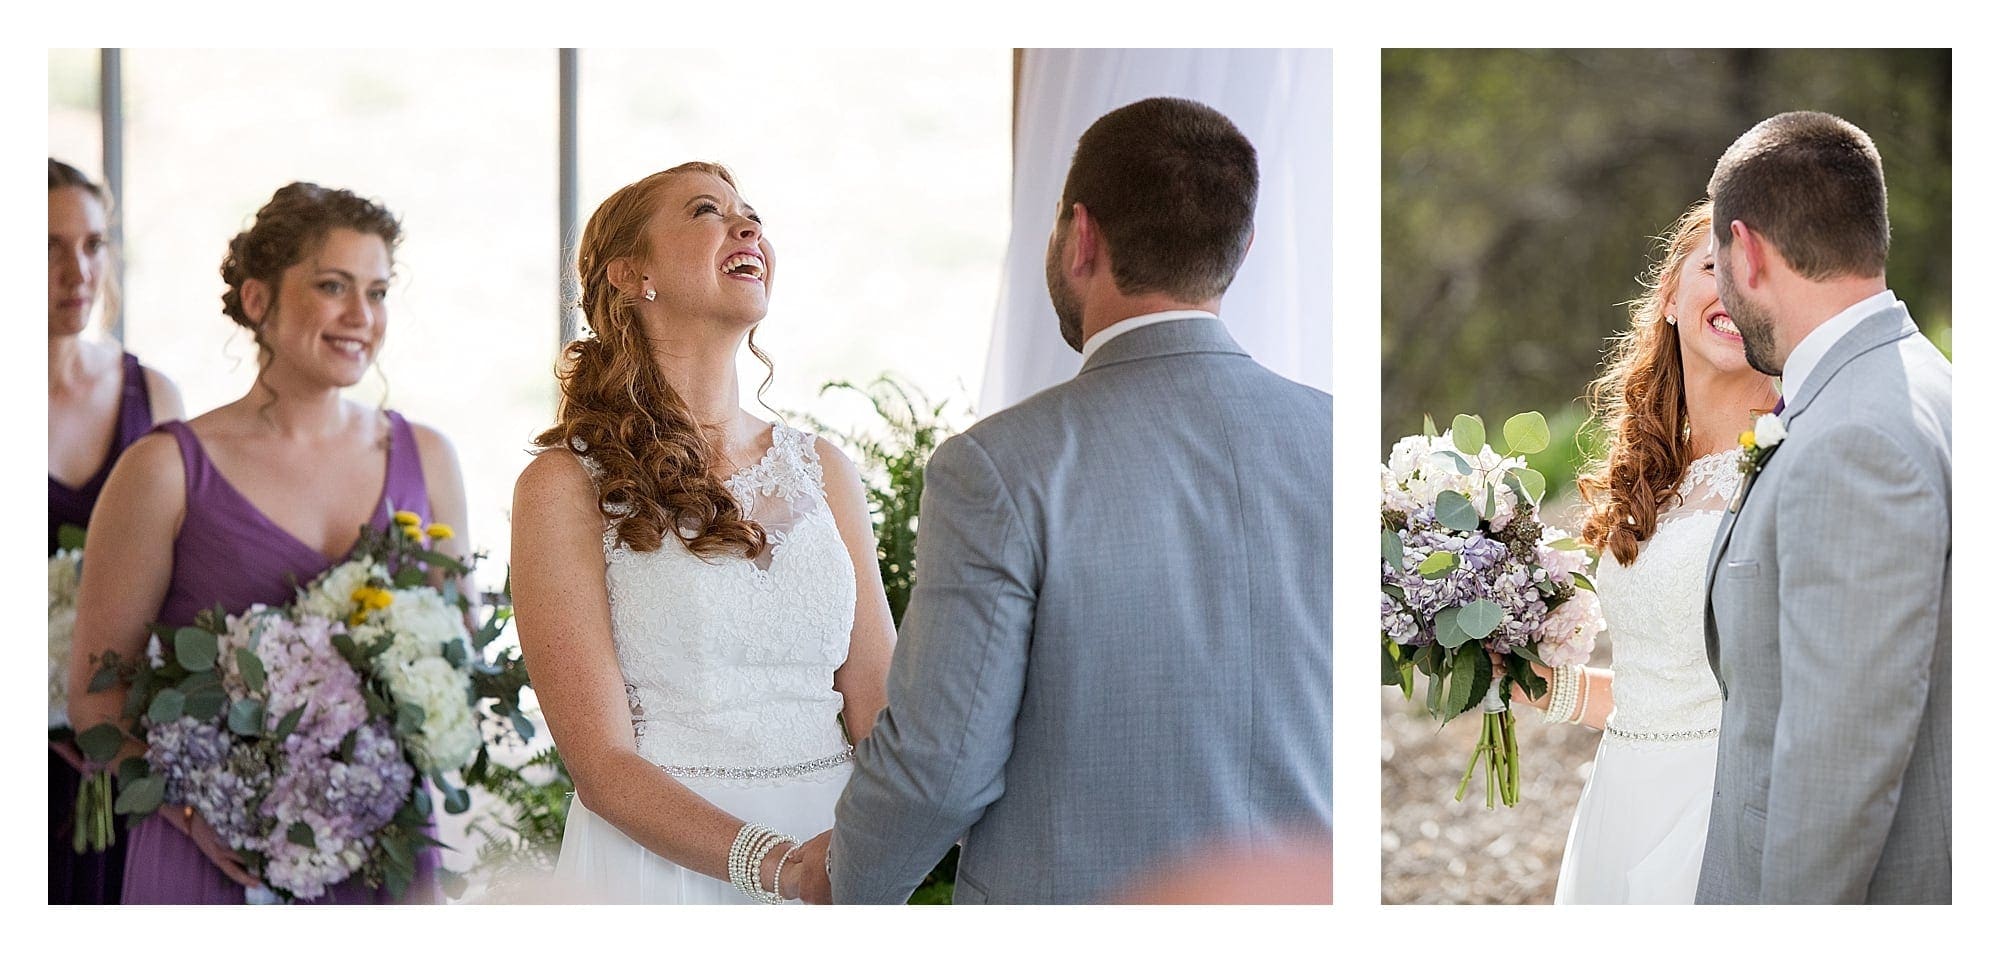 Bride and groom laugh during wedding ceremony